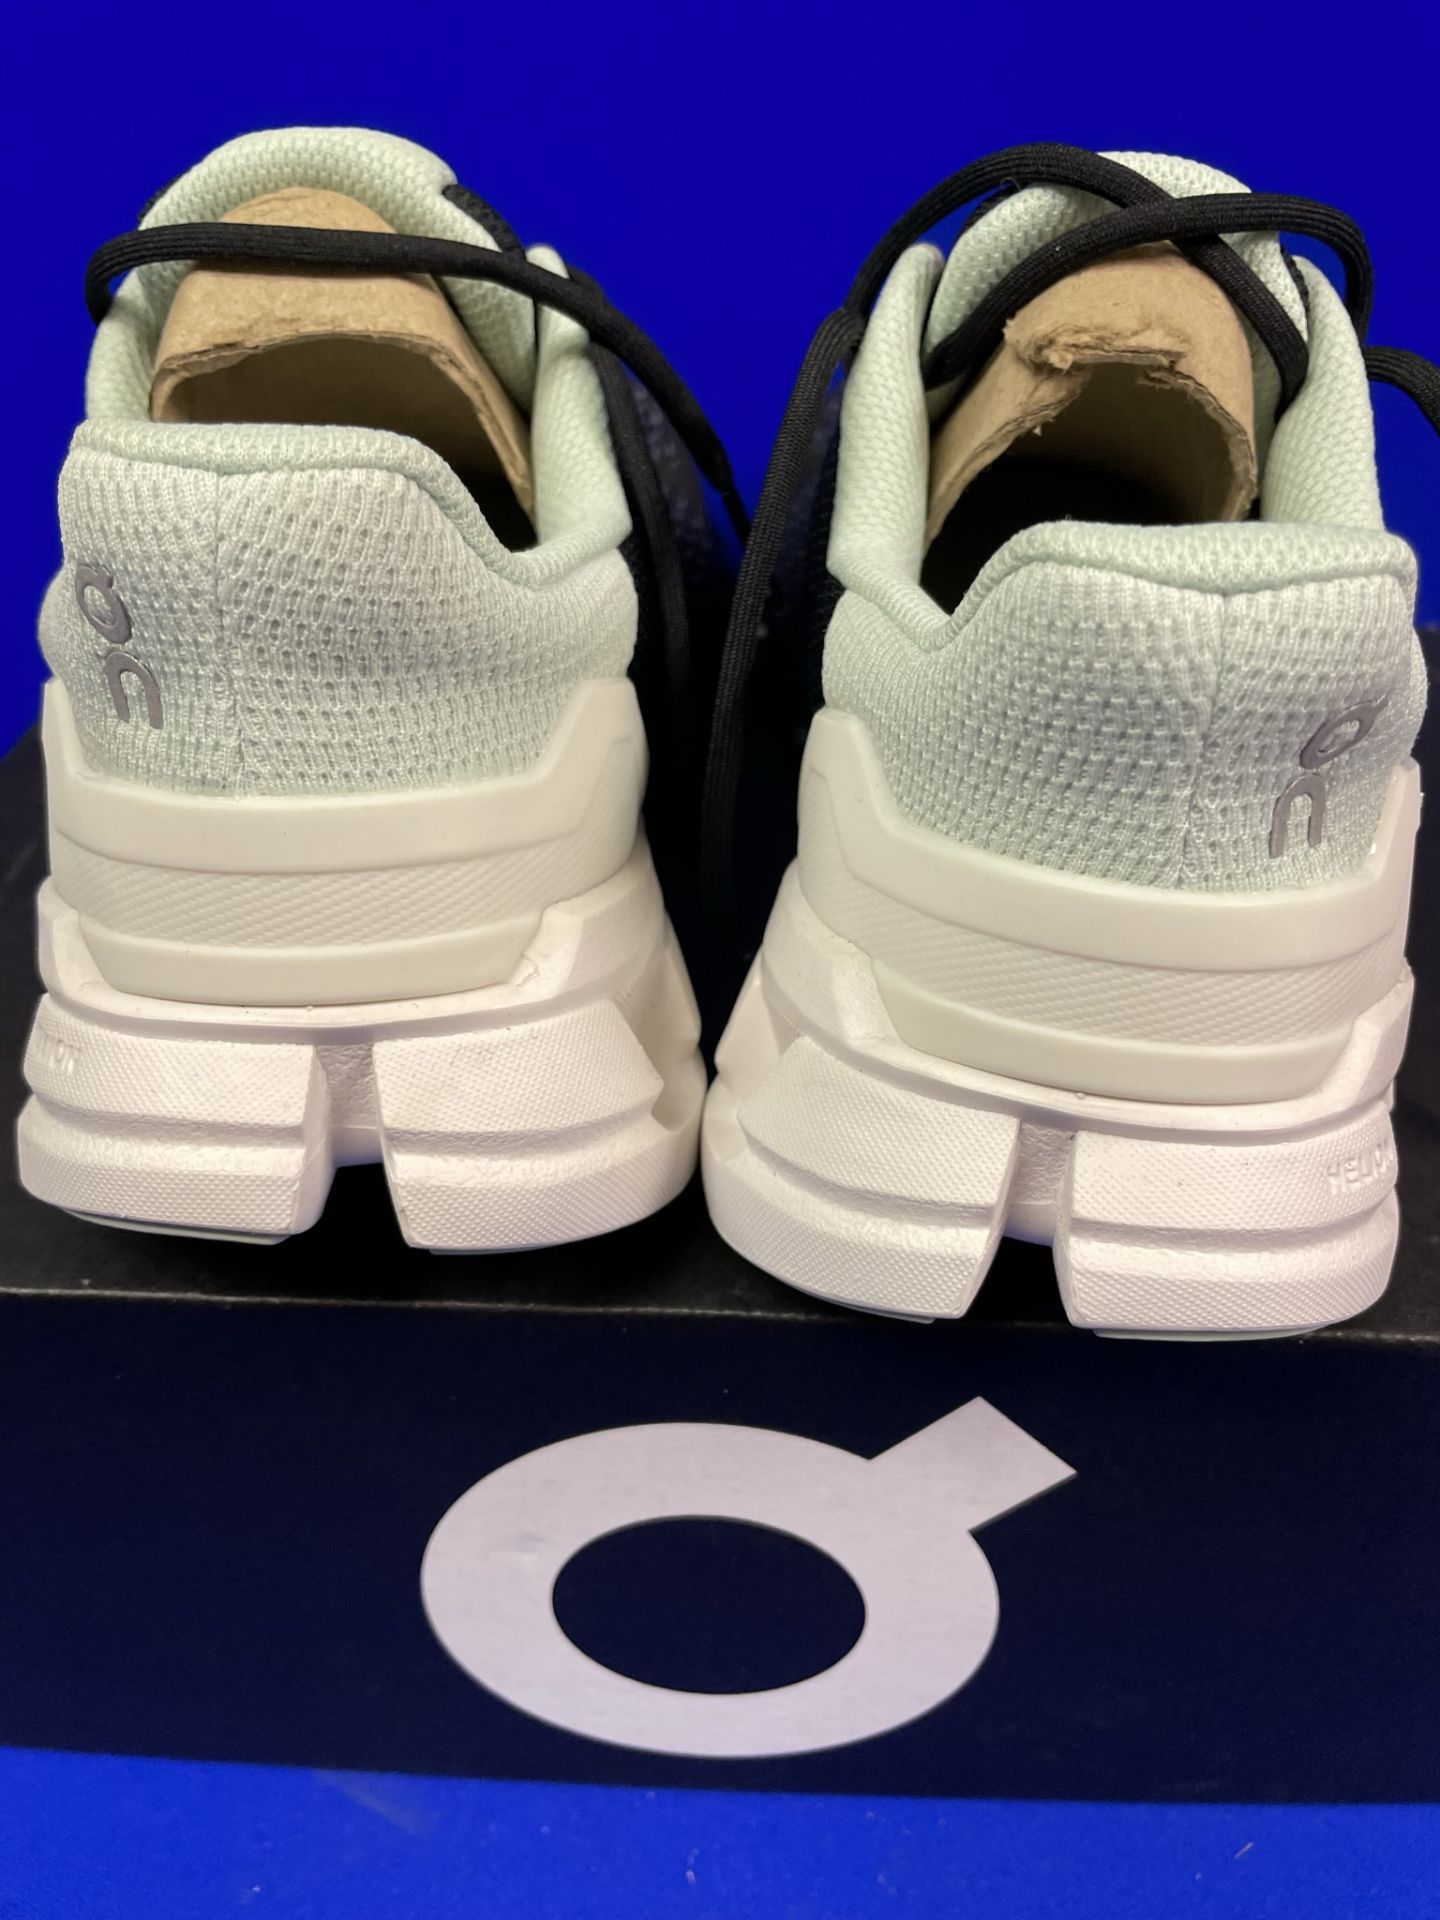 ON Women's Trainers | UK 3.5 - Image 3 of 5